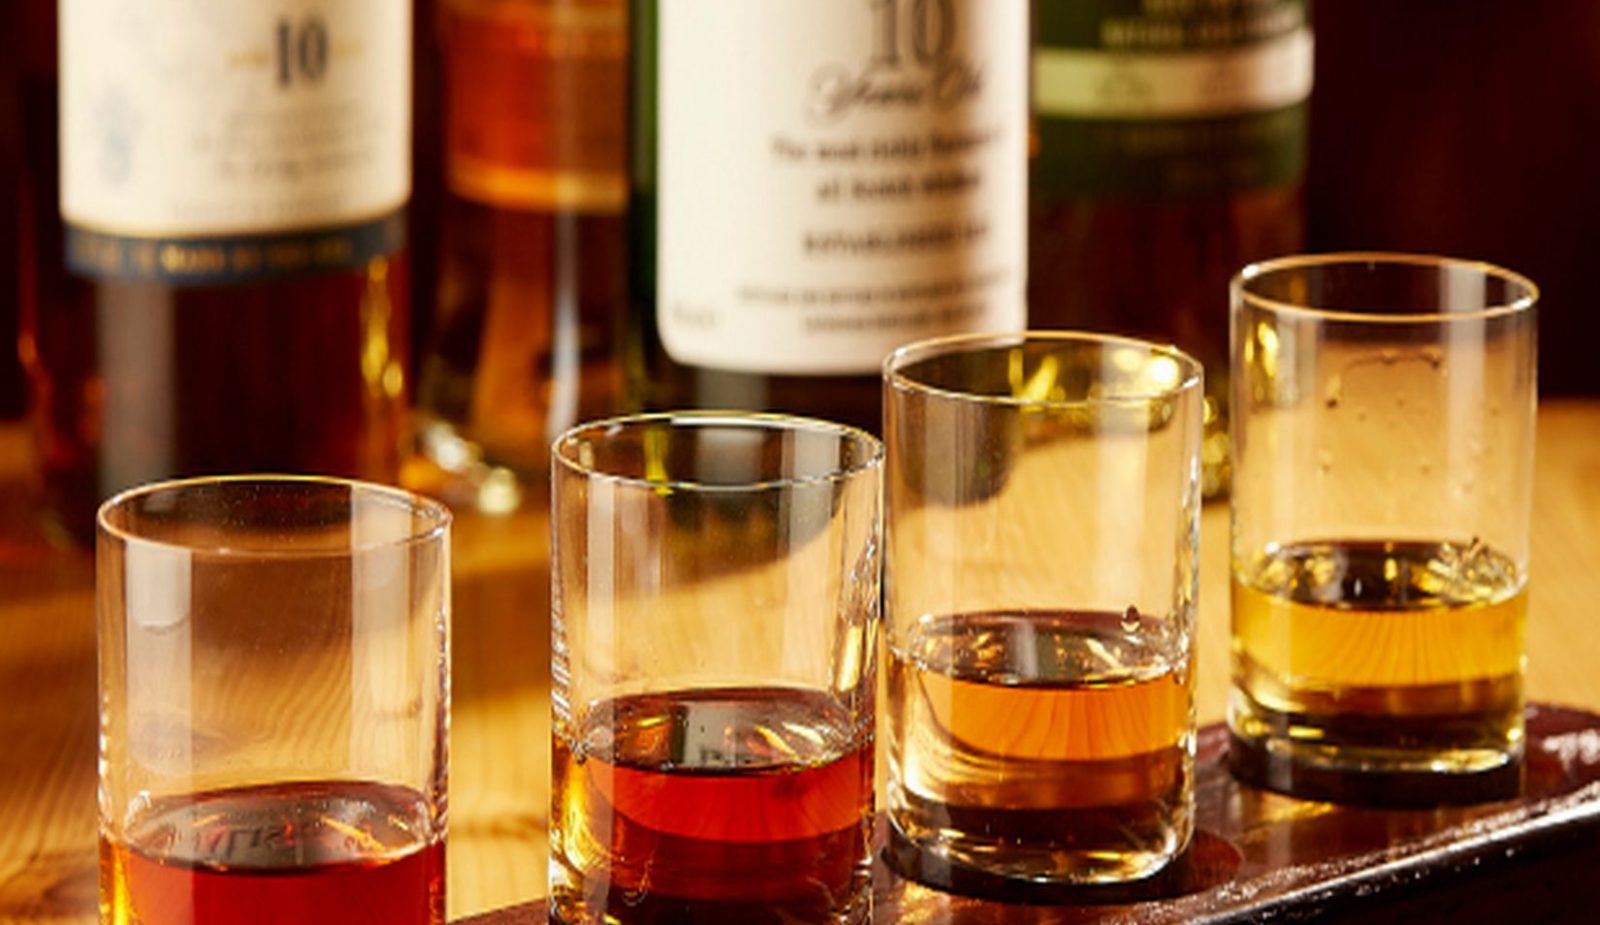 tasting glasses of 4 different kinds of bourbon in our restaurant.